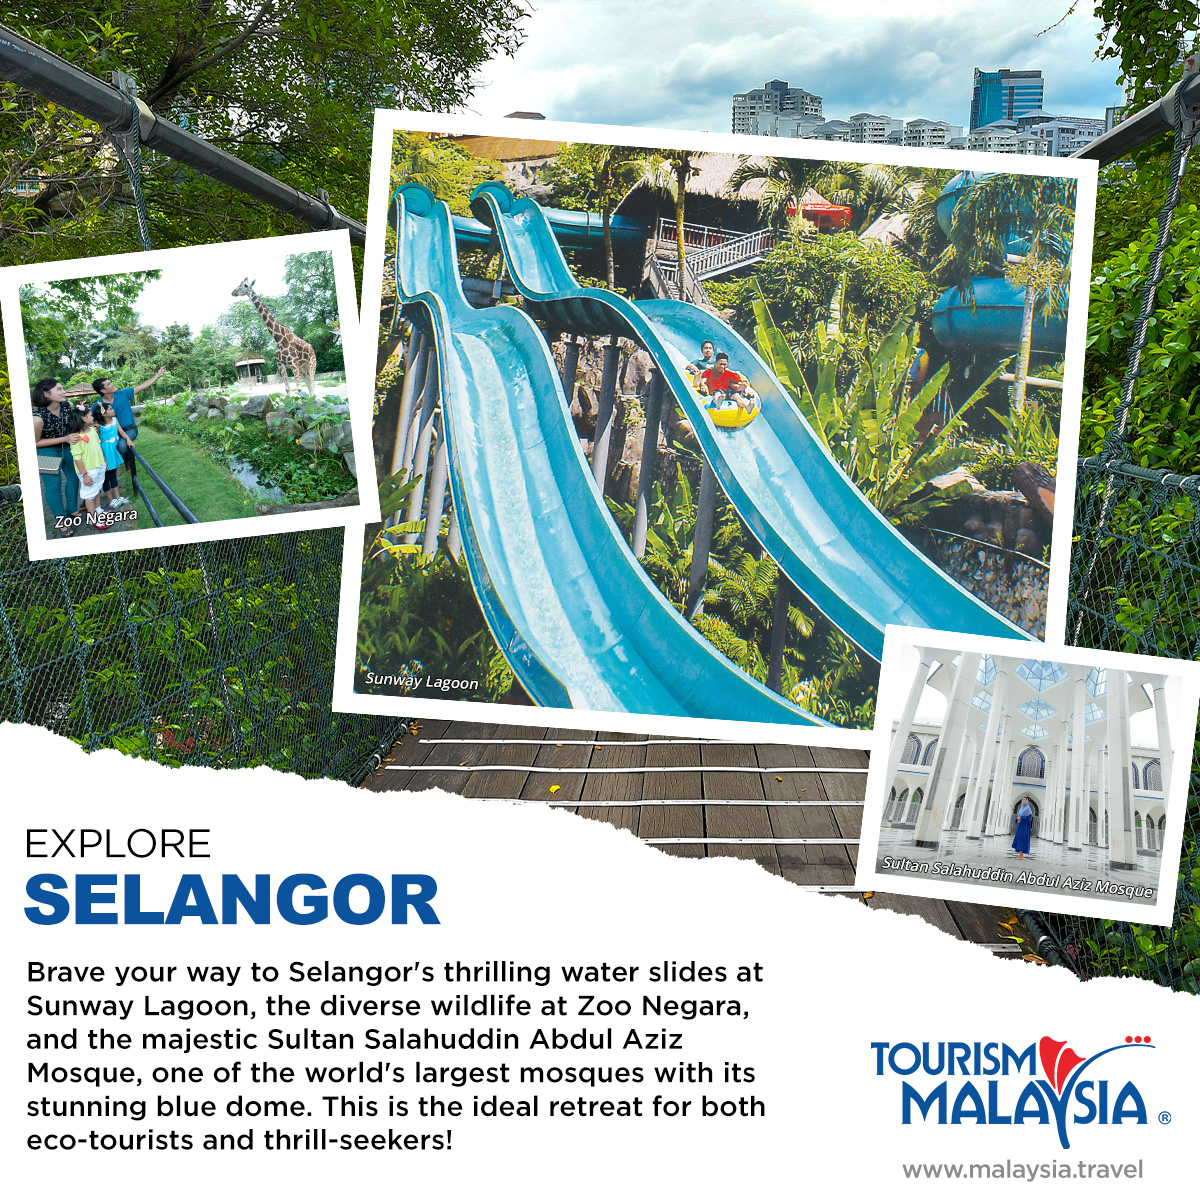 📍 Selangor, Malaysia 📍

Experience the ecological wonders of Selangor with @TourismMalaysia, where nature and wildlife flourish amidst stunning landscapes and unparalleled natural beauty that promises an unforgettable adventure! 🌿

#MalaysiaTrulyAsia #VisitMalaysia2026